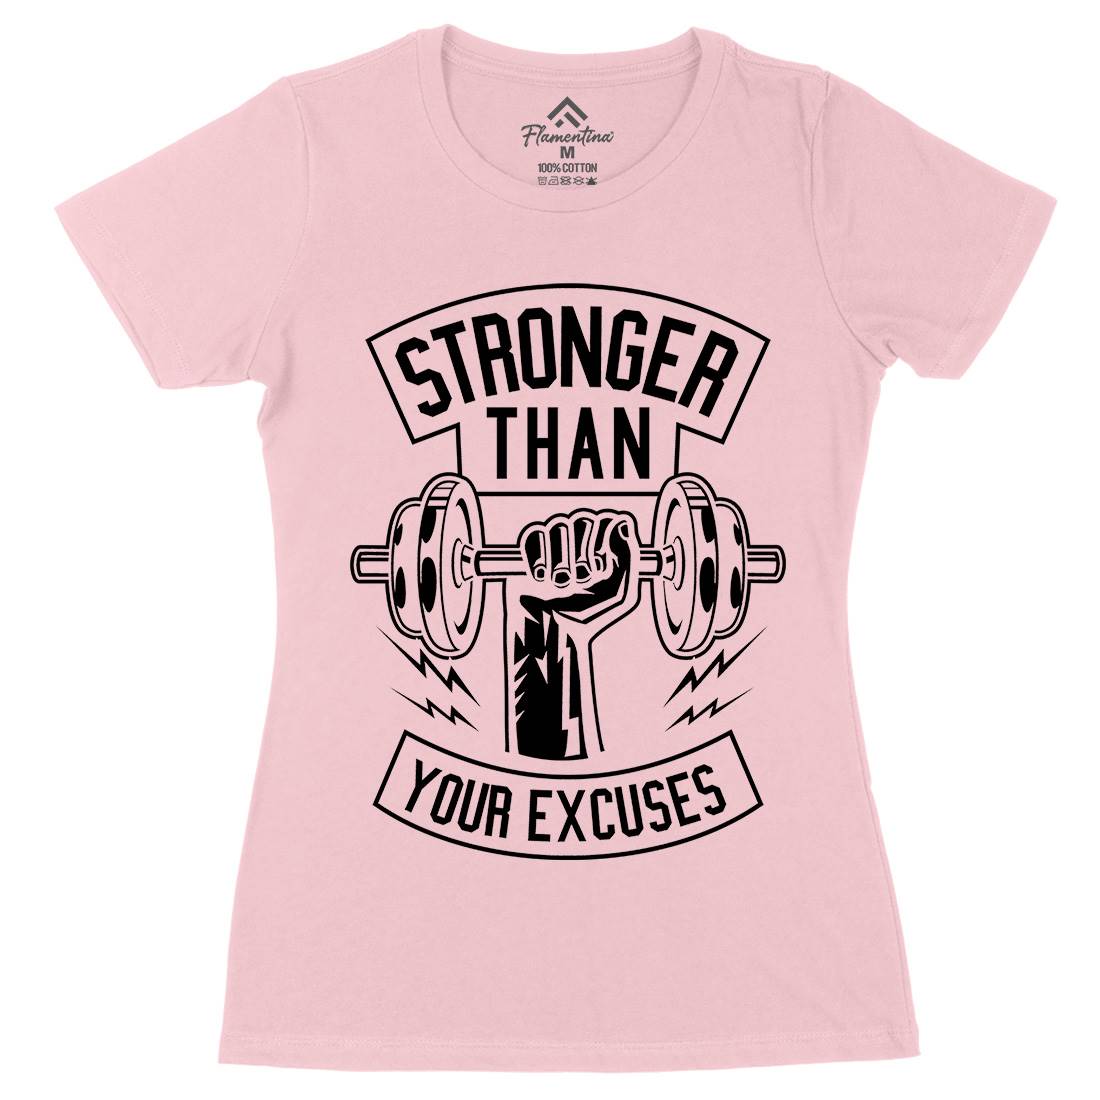 Stronger Than Your Excuses Womens Organic Crew Neck T-Shirt Gym B644